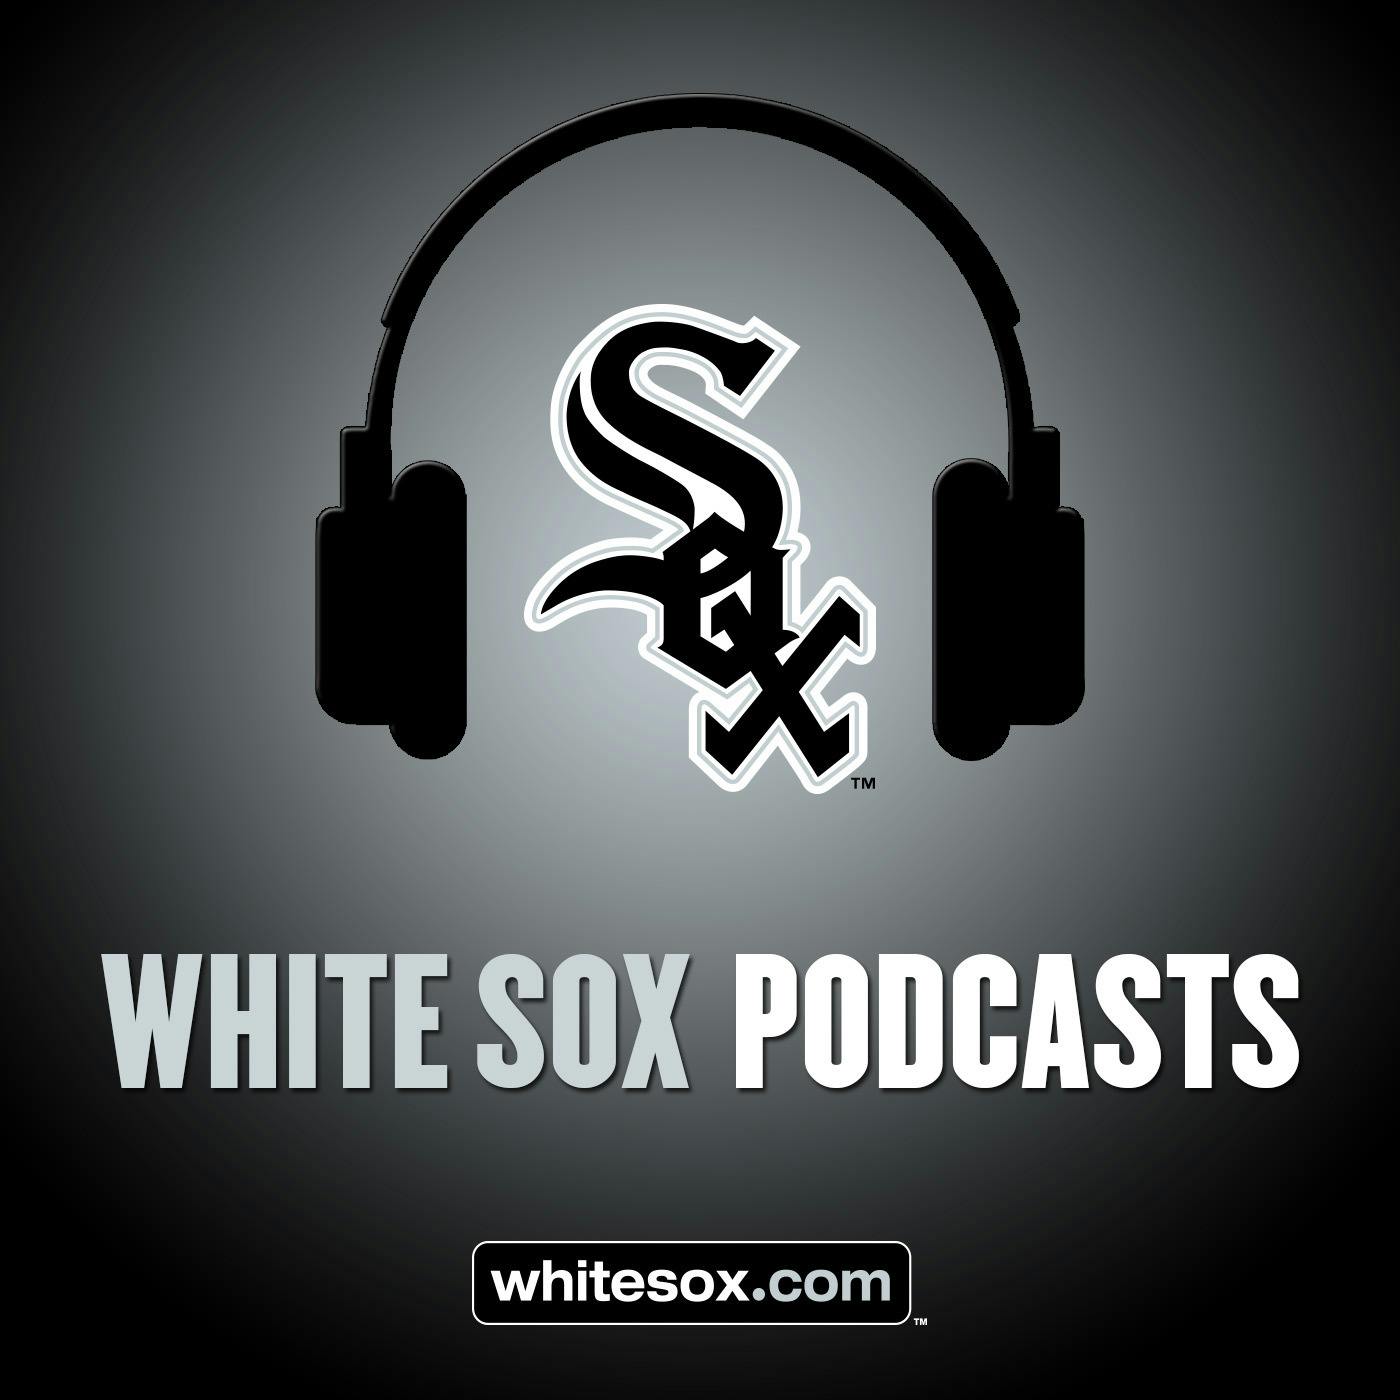 10/29/17: White Sox Weekly